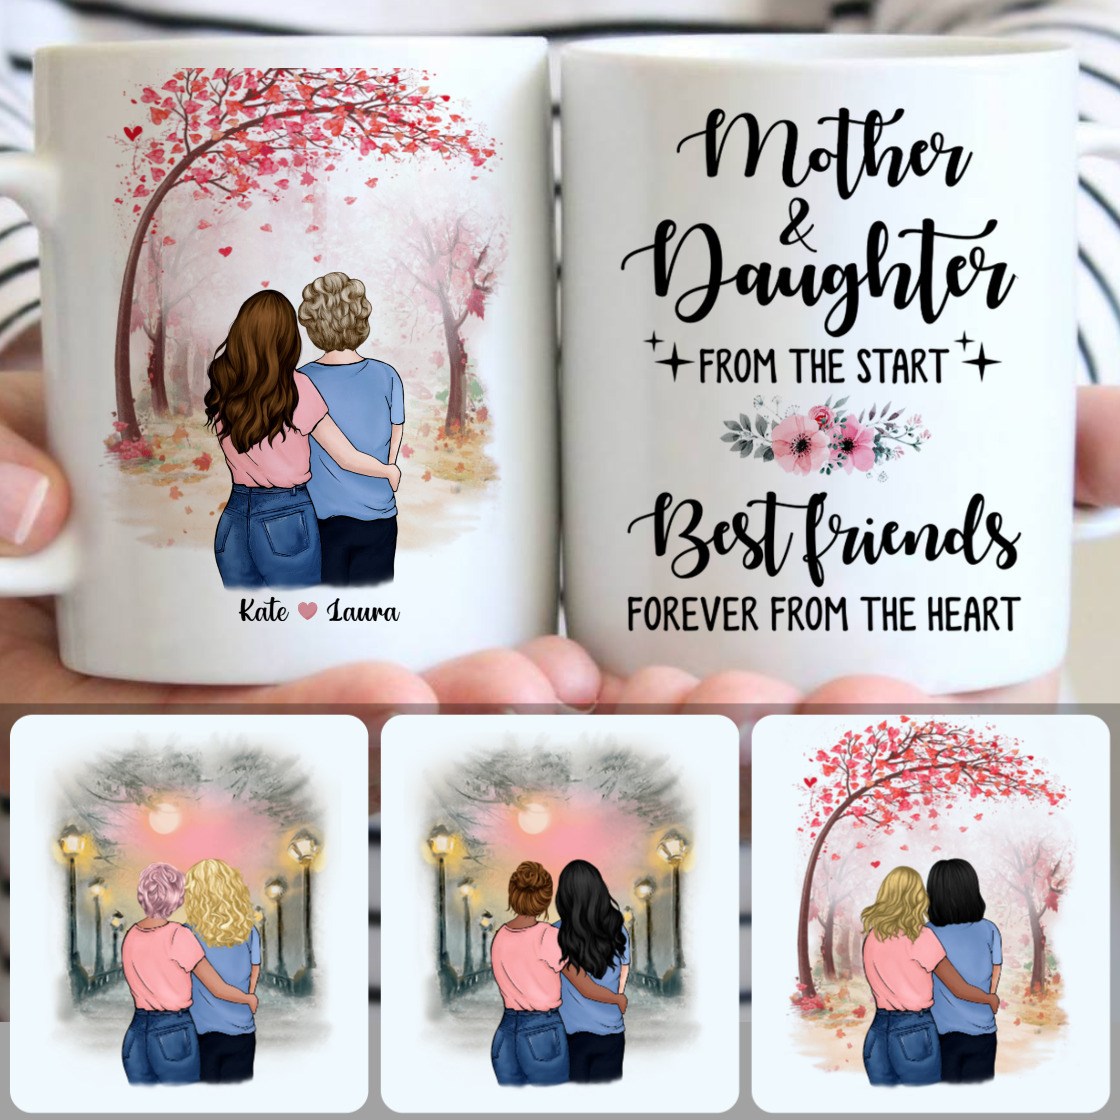 Personalized Mug, Unique Gifts For Stepmom, Mother & Daughter Customized Coffee Mug With Names